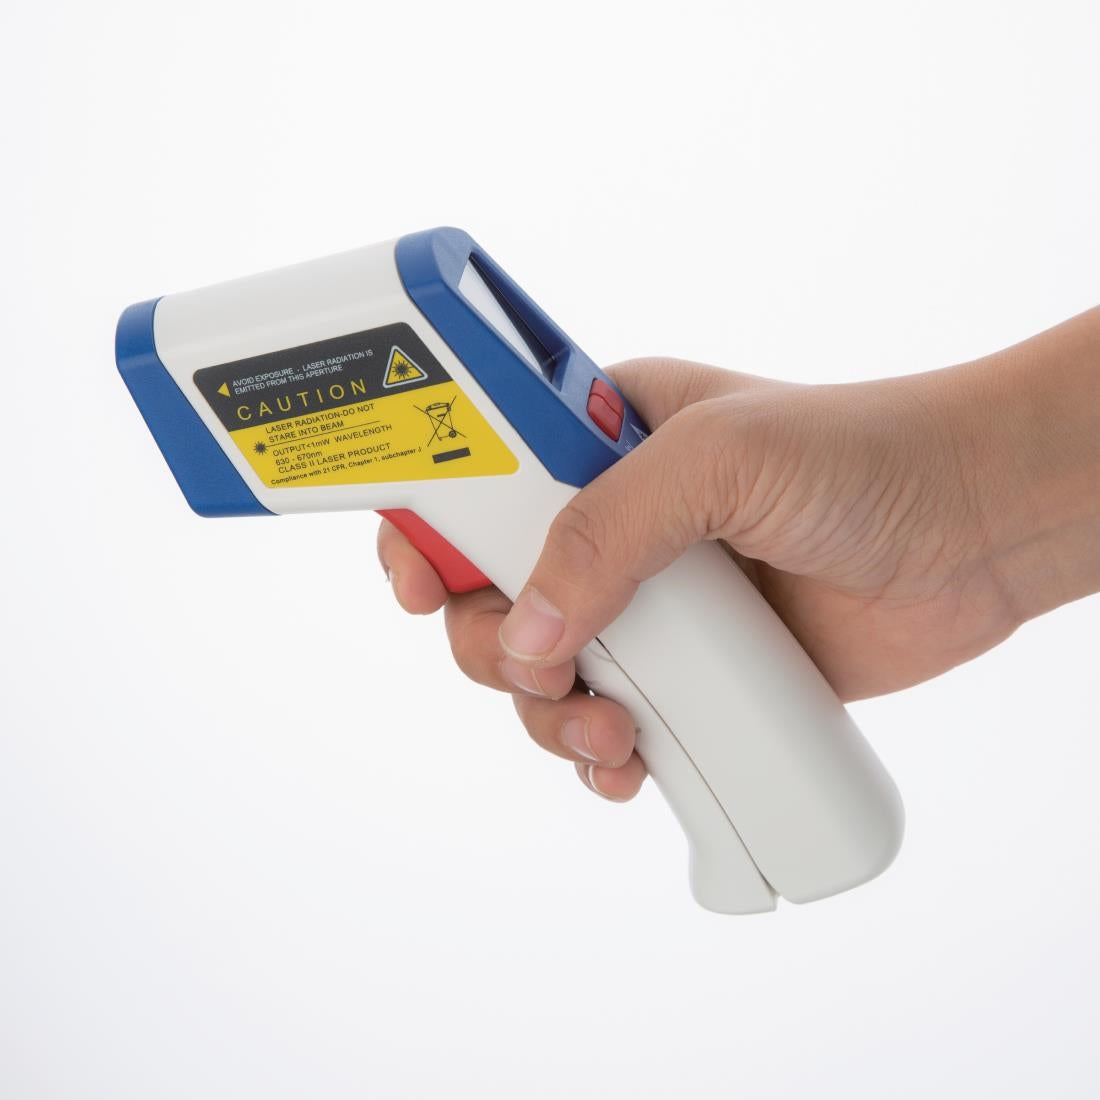 Hygiplas Mini Infrared Thermometer JD Catering Equipment Solutions Ltd